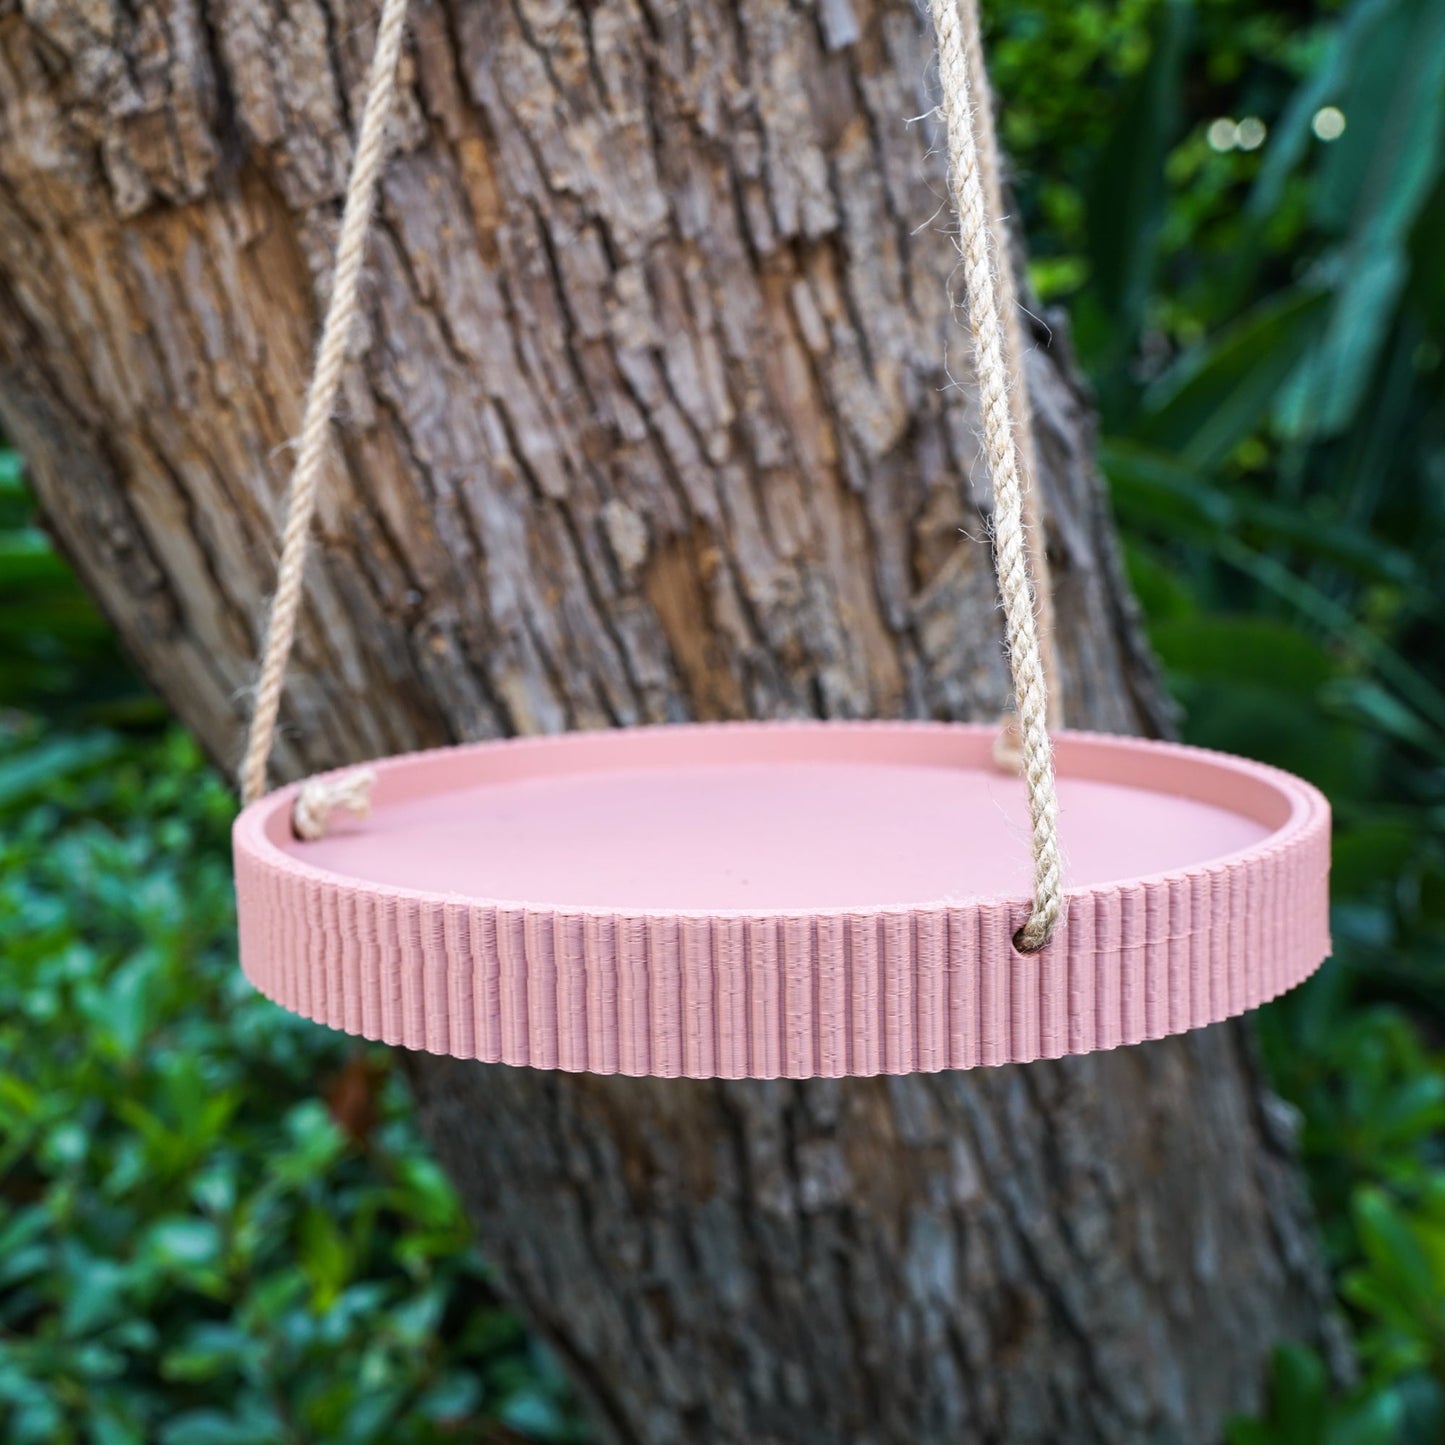 The Ribbed Hanging Plant Tray - Rosebud HomeGoods Rainbow 8 Inch MODERN HOME GOOD